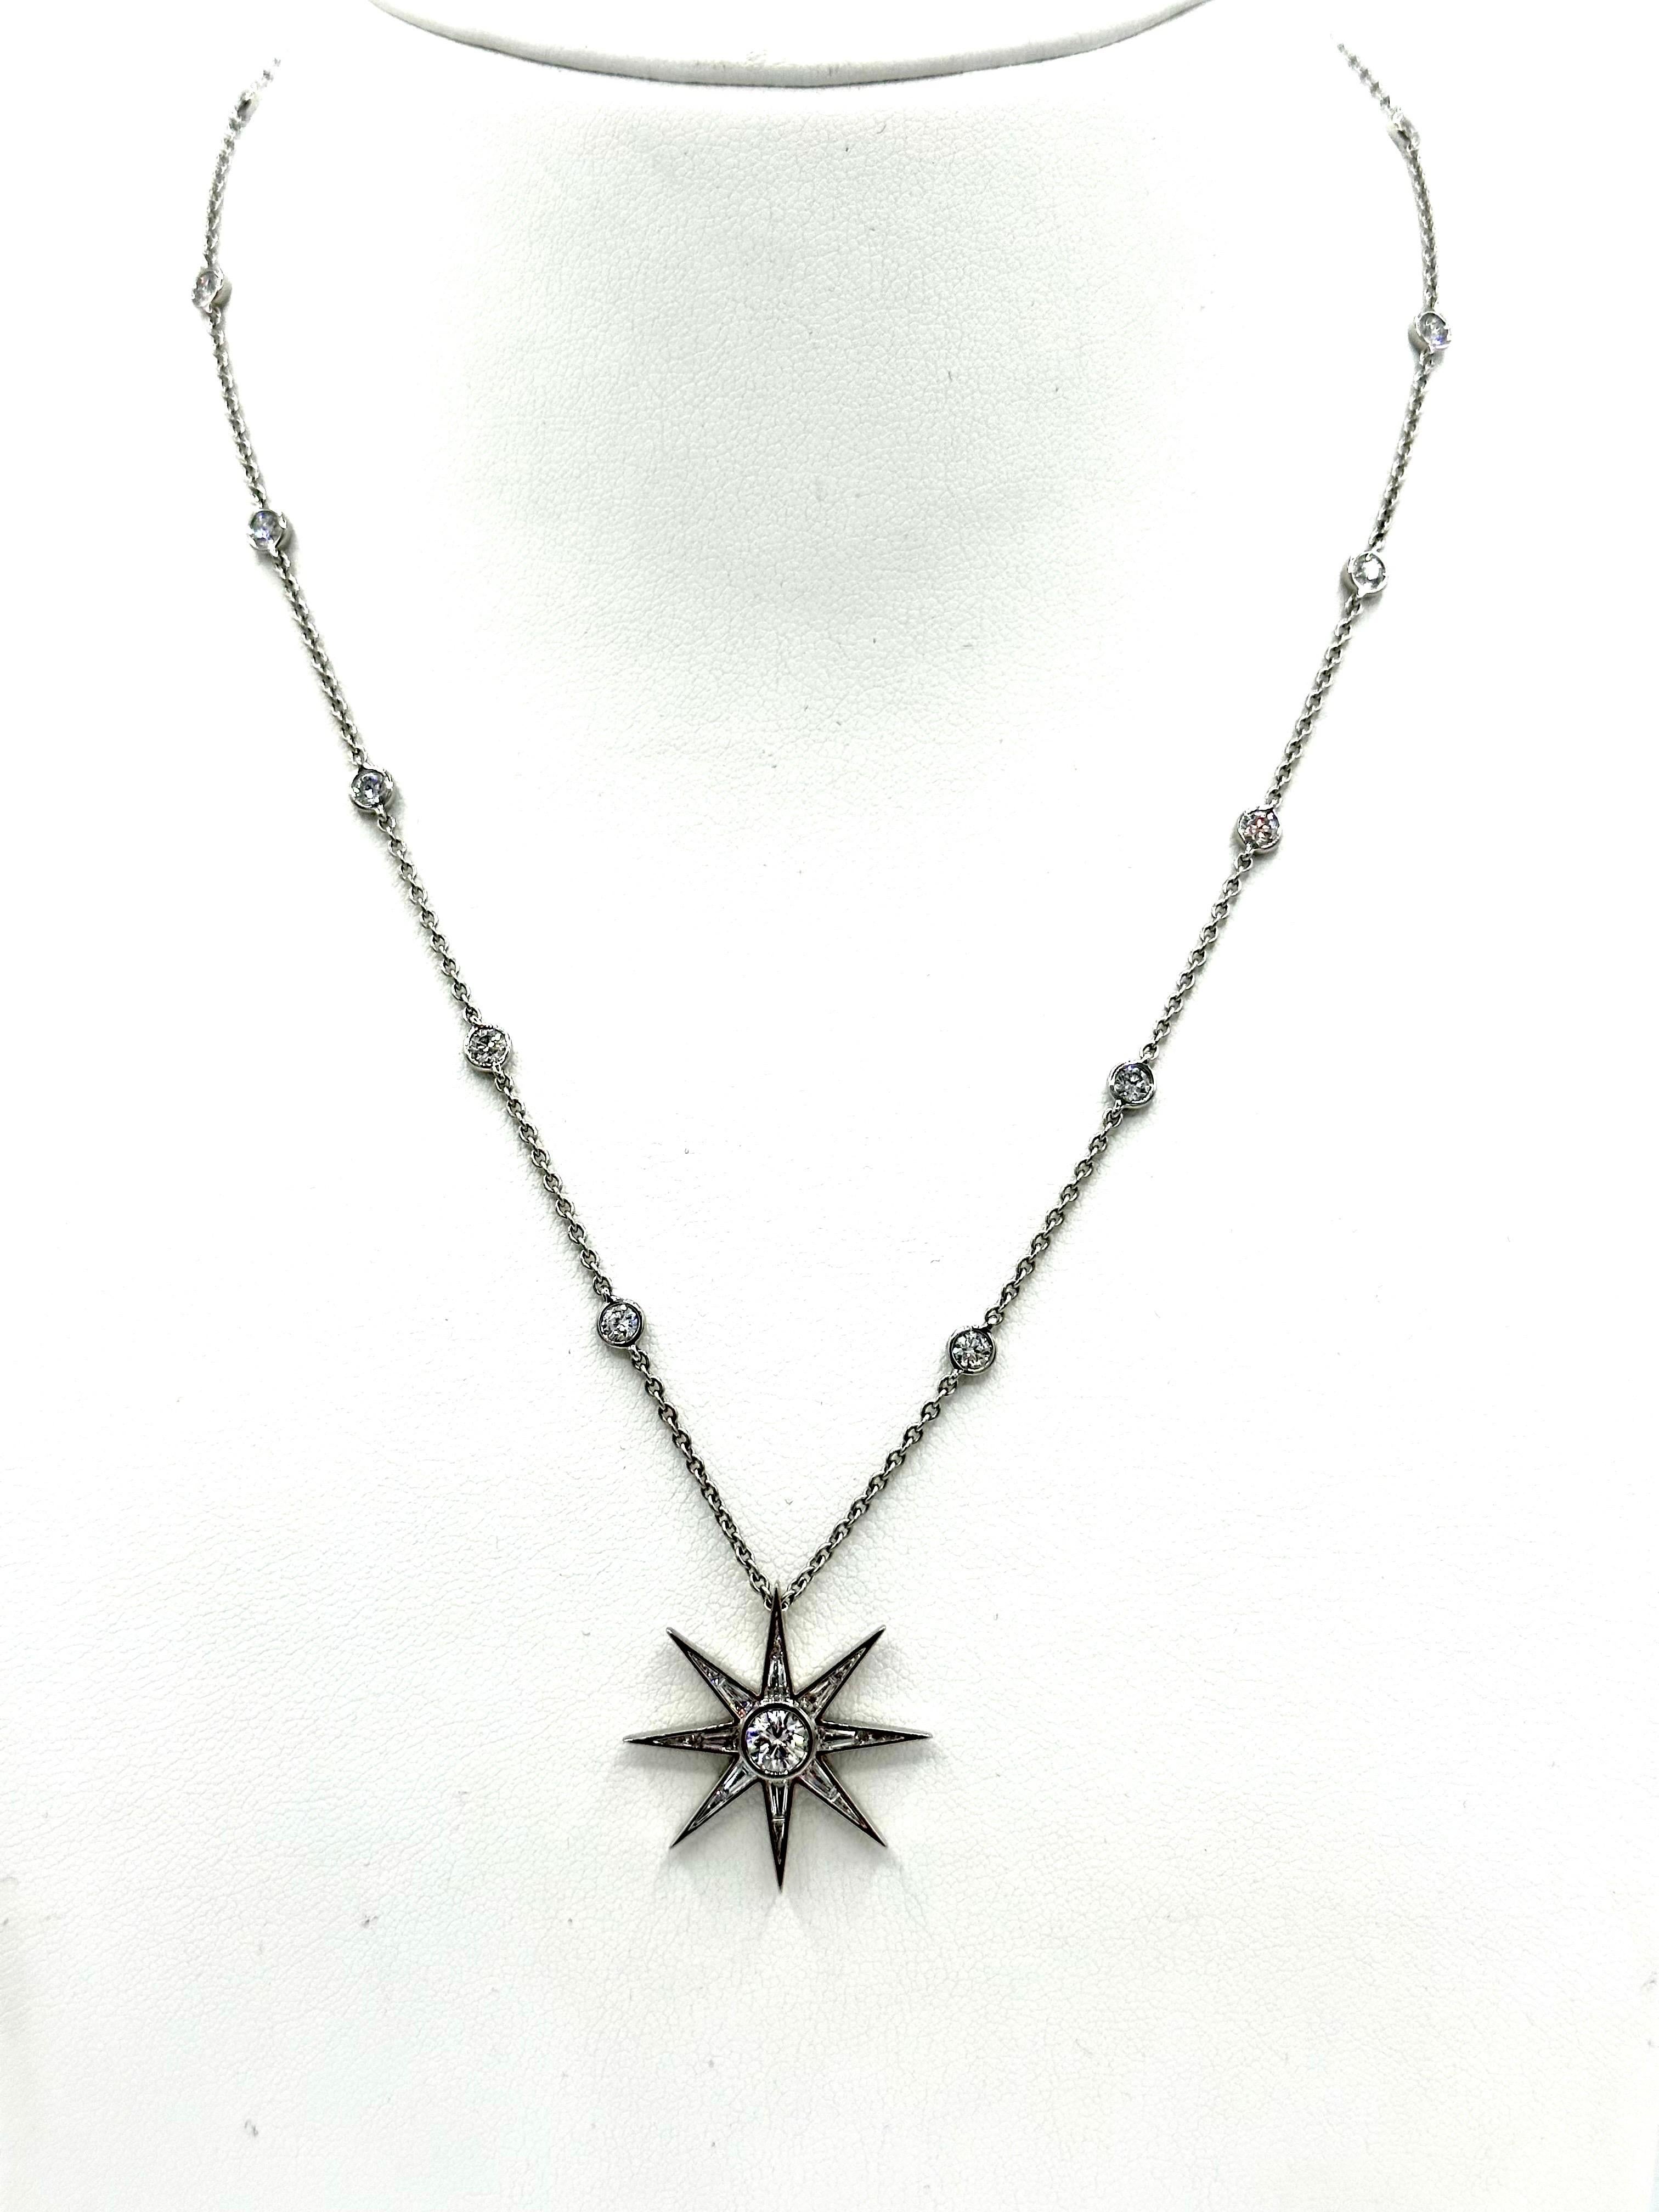 Robert Procop 2.60 Carat Diamond Luminous Starburst Pendant Necklace In New Condition For Sale In Chevy Chase, MD